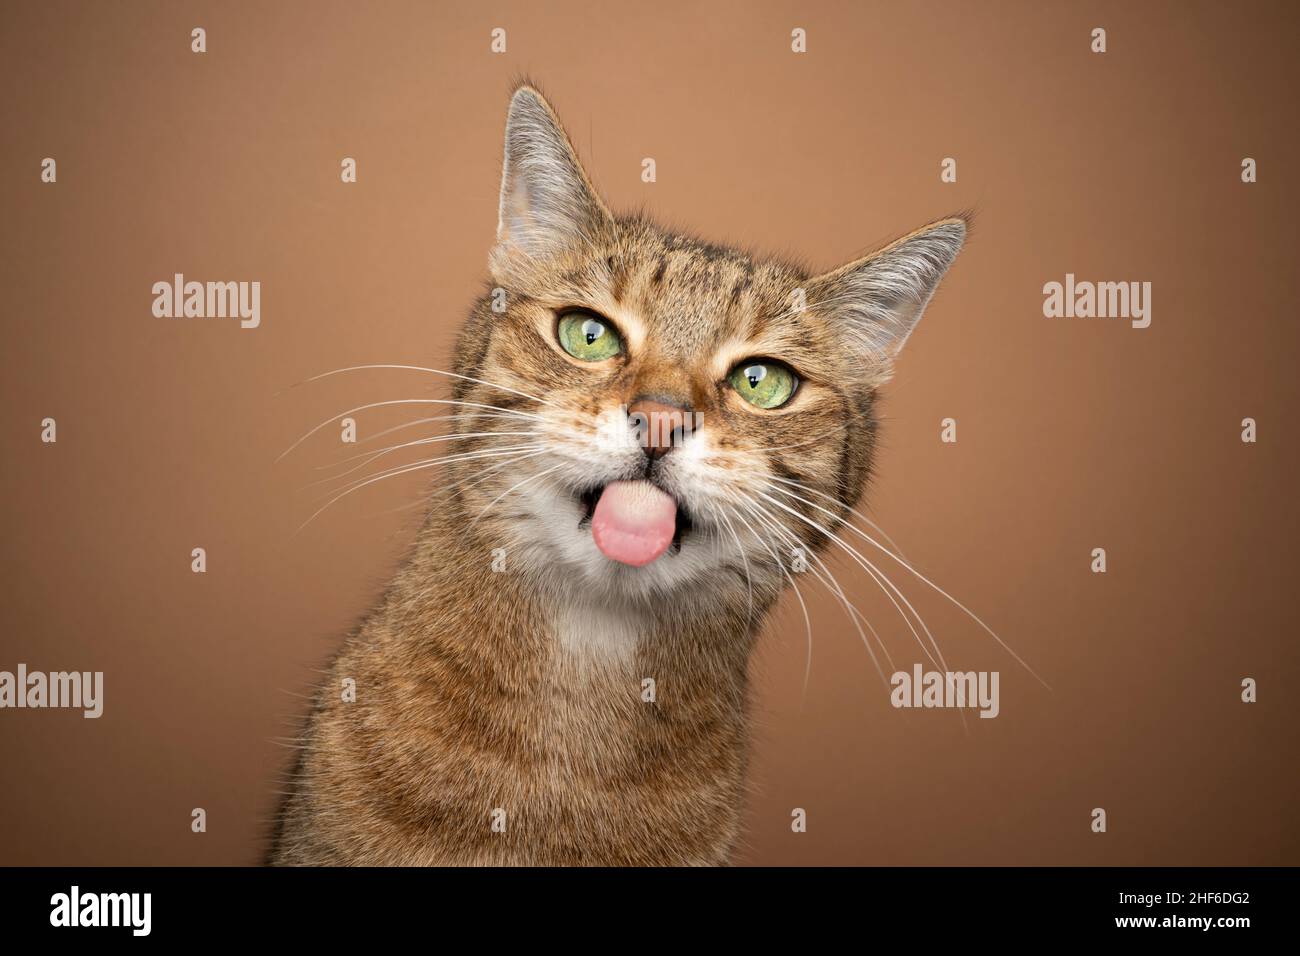 naughty cat sticking out tongue. light brown tabby kitty with green eyes making funny face on brown background looking at camera Stock Photo